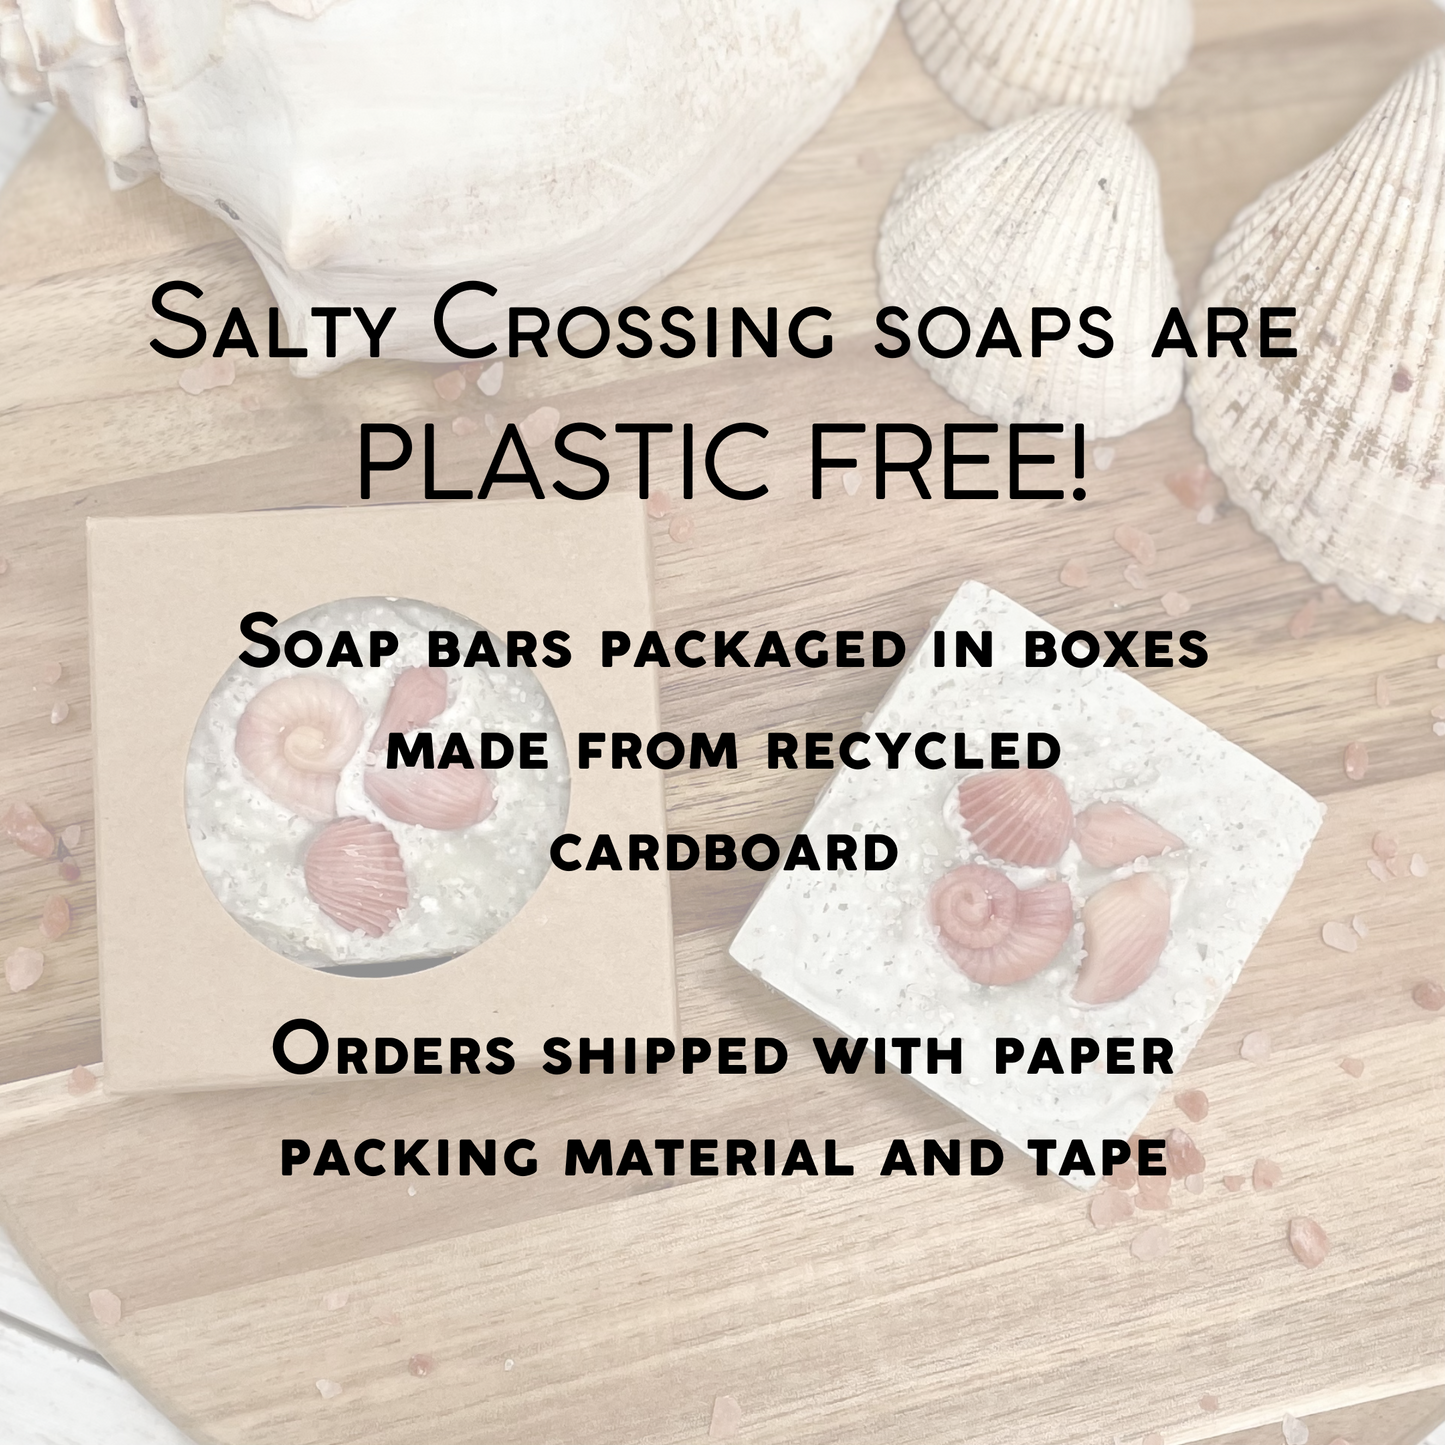 Graphic- salty crossing soaps are plastic free. Soap bars are packaged in boxes made from recycled cardboard. Orders are shipped with paper packing material and tape.